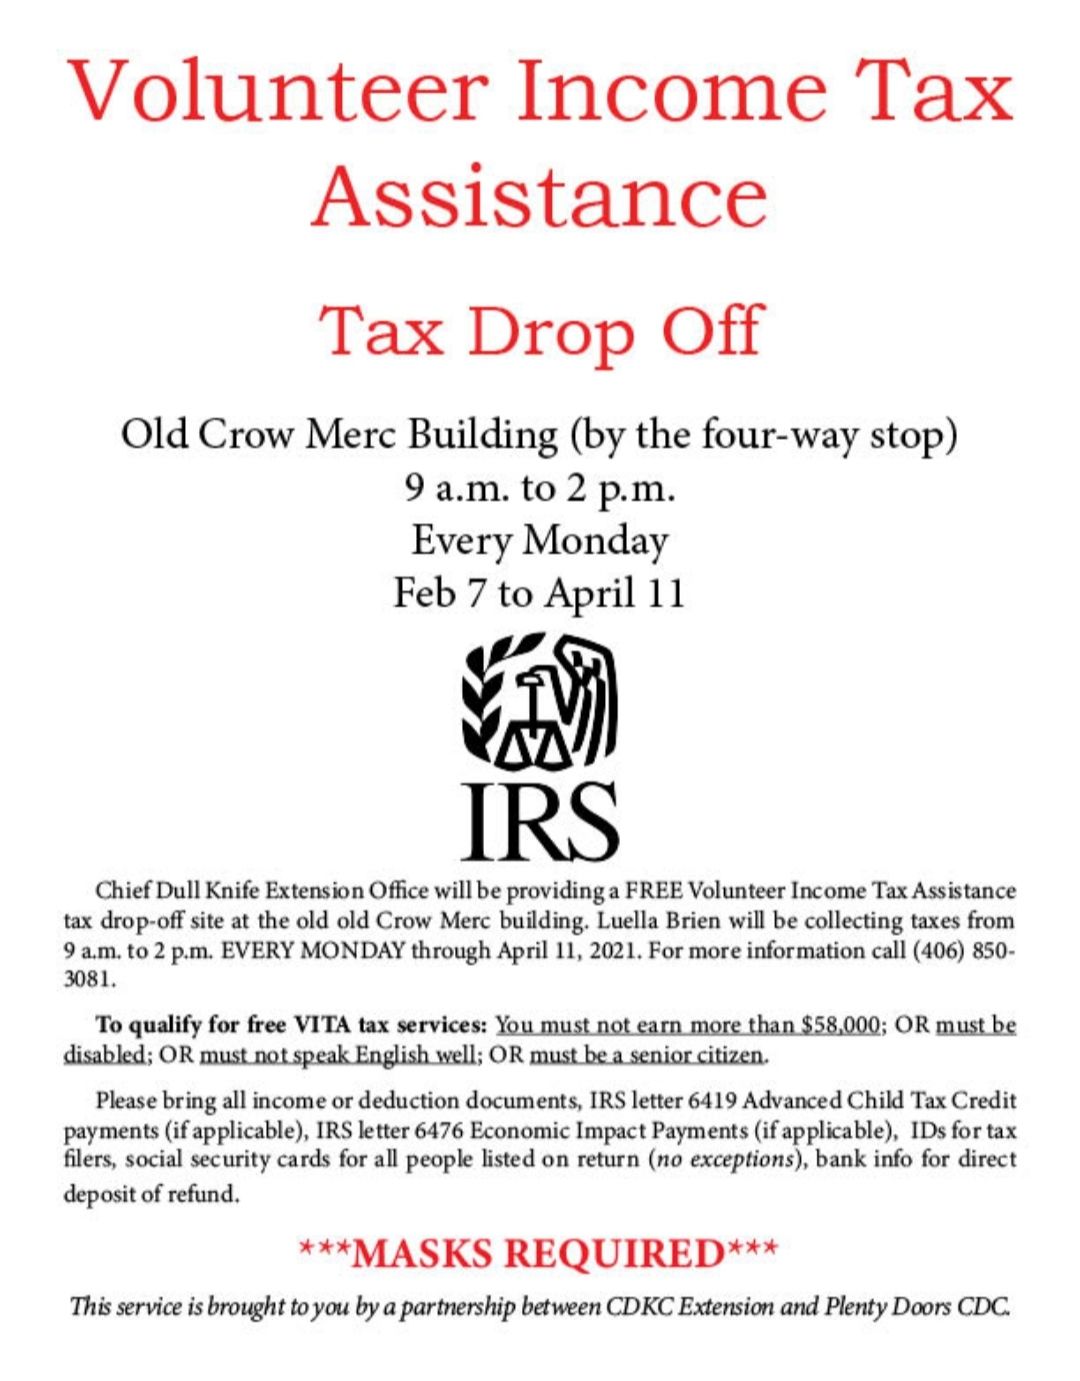 Free Tax Filing Assistance Available